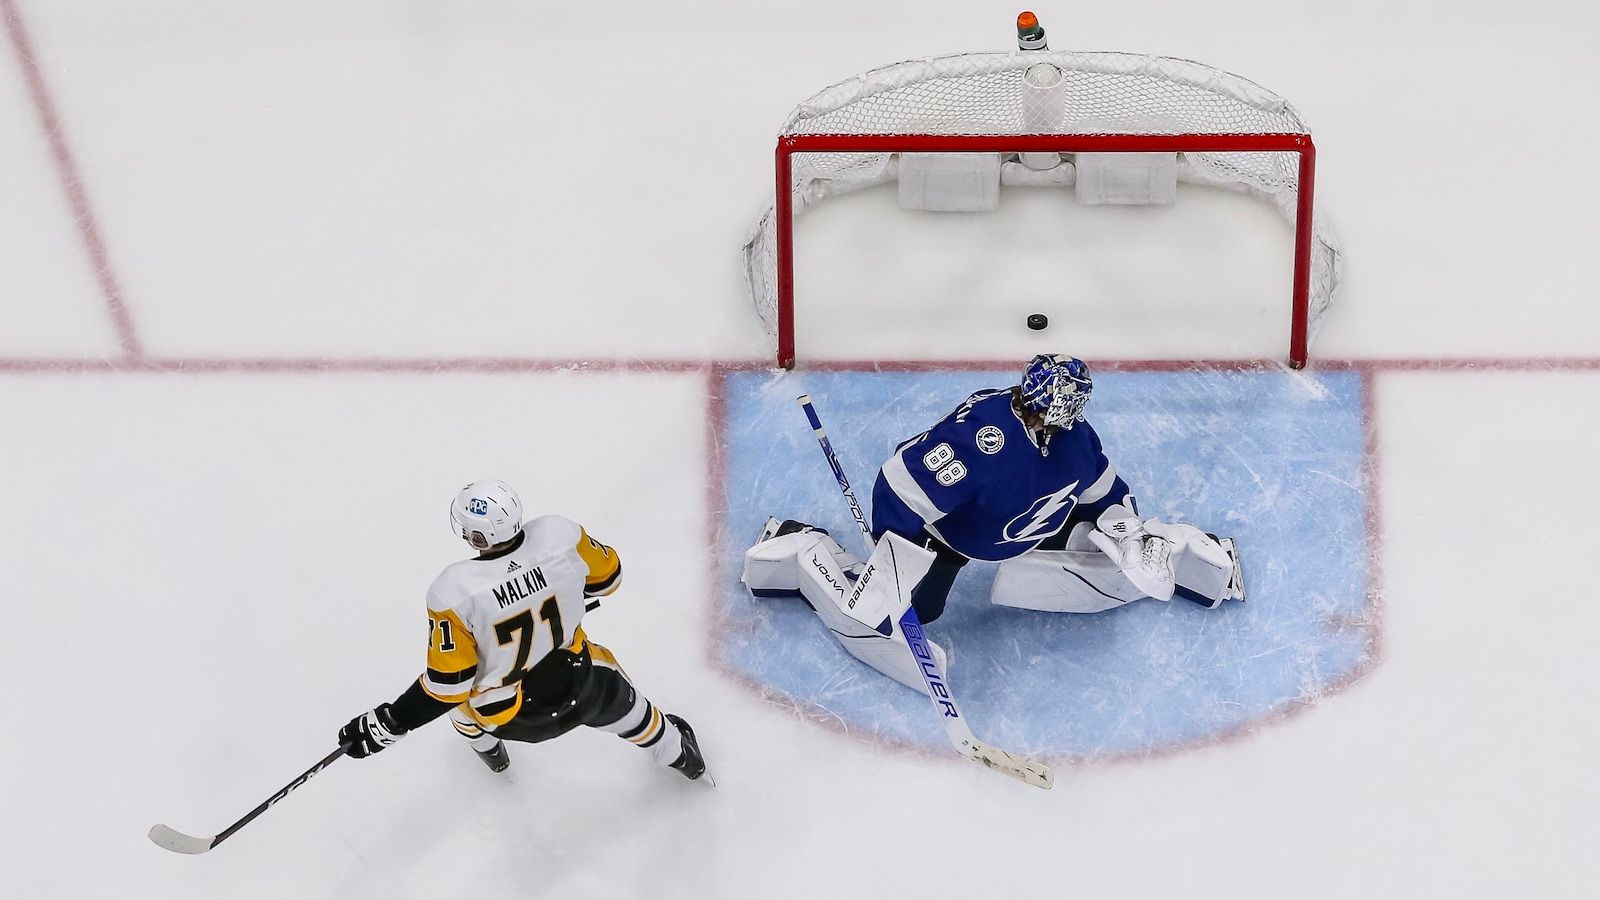 Beast mode' Malkin helps Penguins down Maple Leafs 4-2 in Hall of Fame game